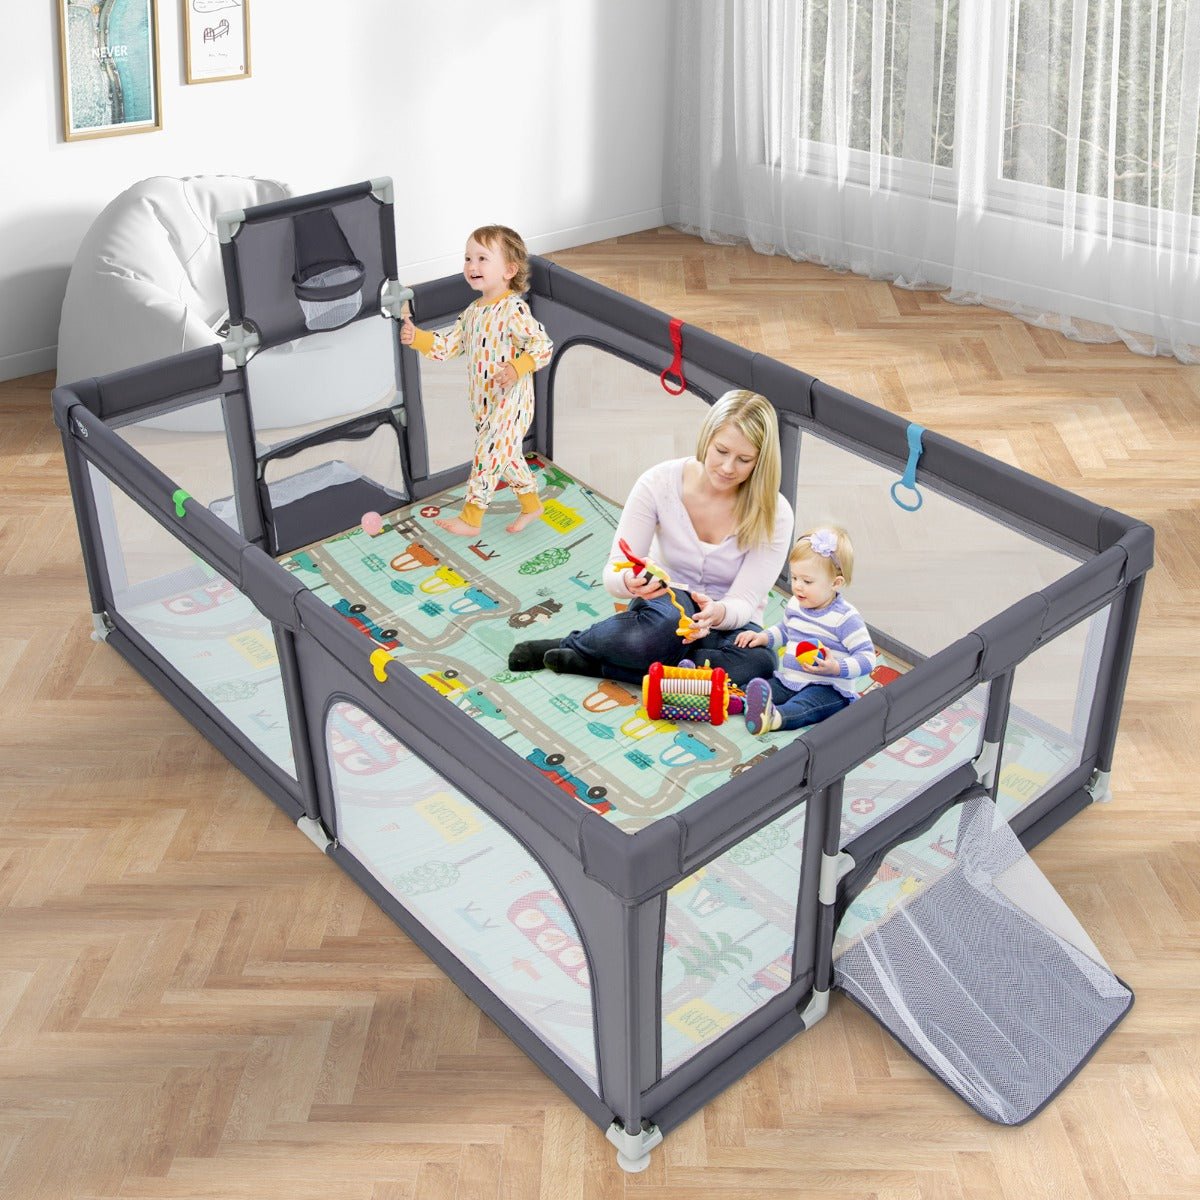 Grey Baby Playpen: Where Fun and Learning Begin